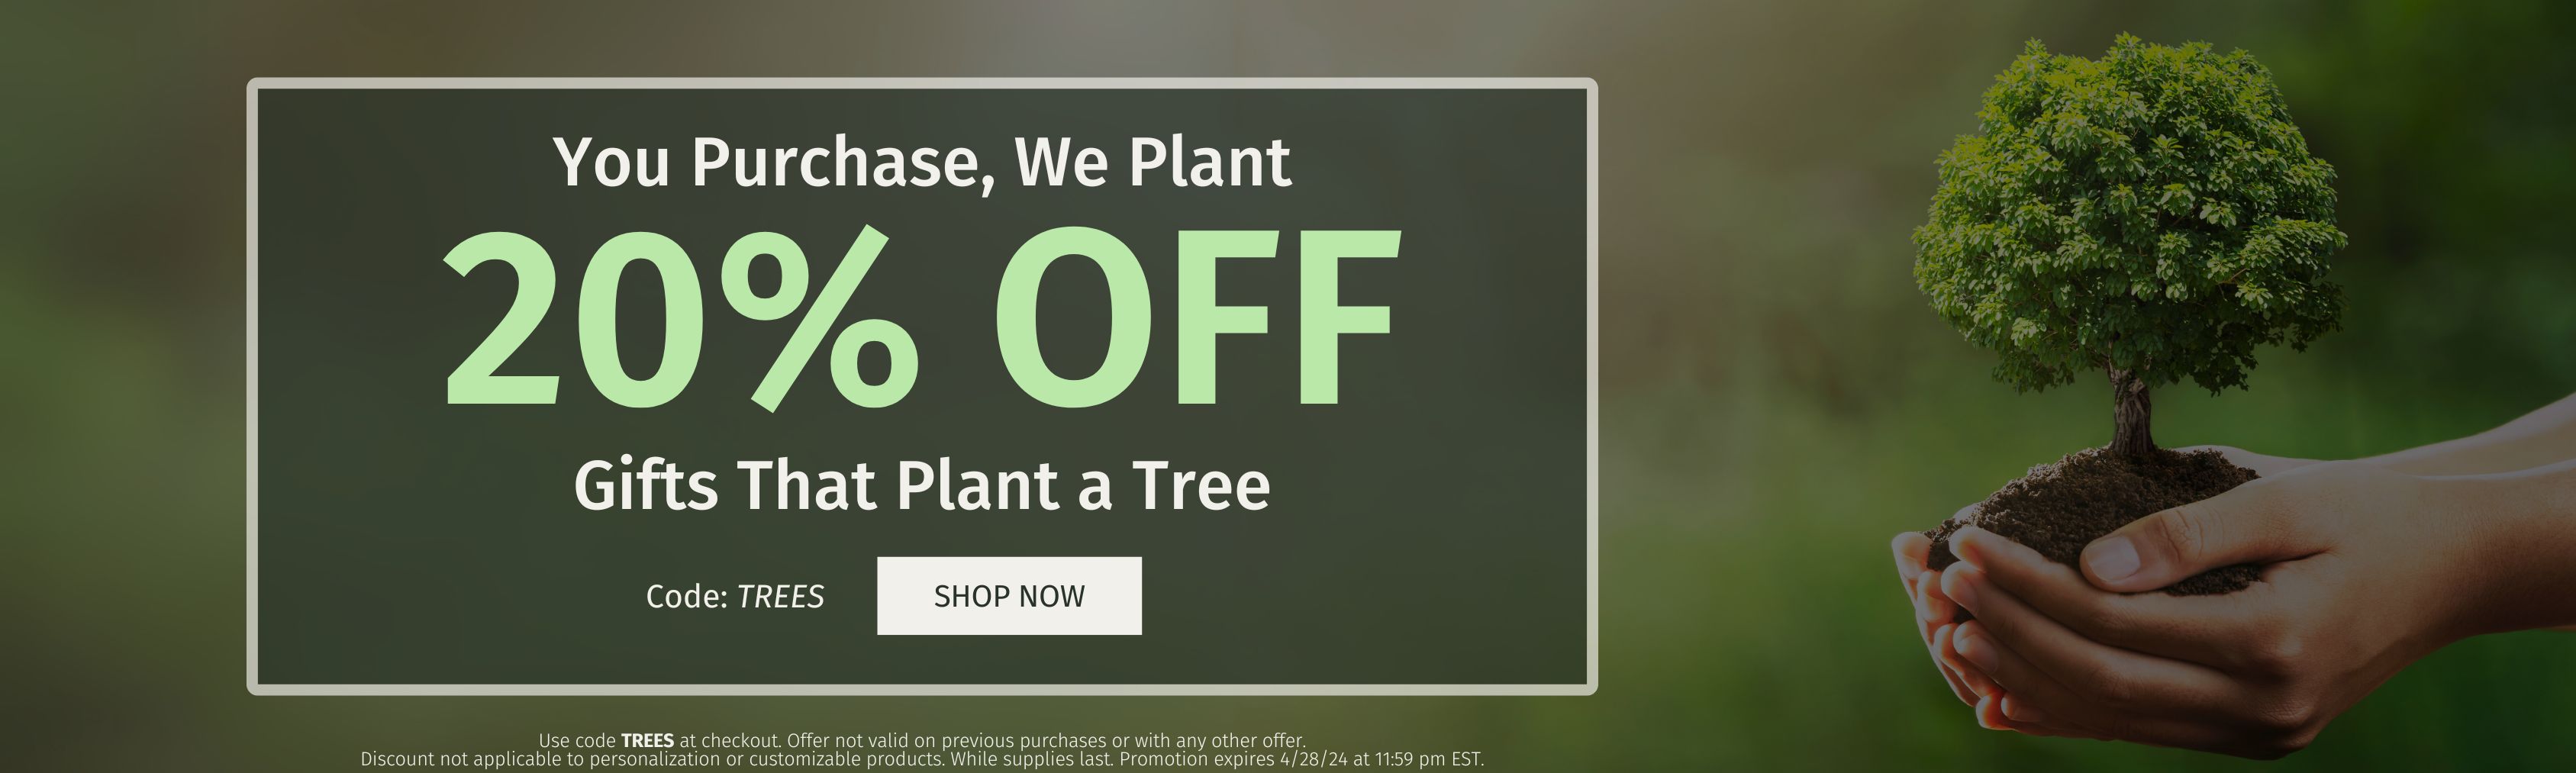 20% off tree gifts with code TREES